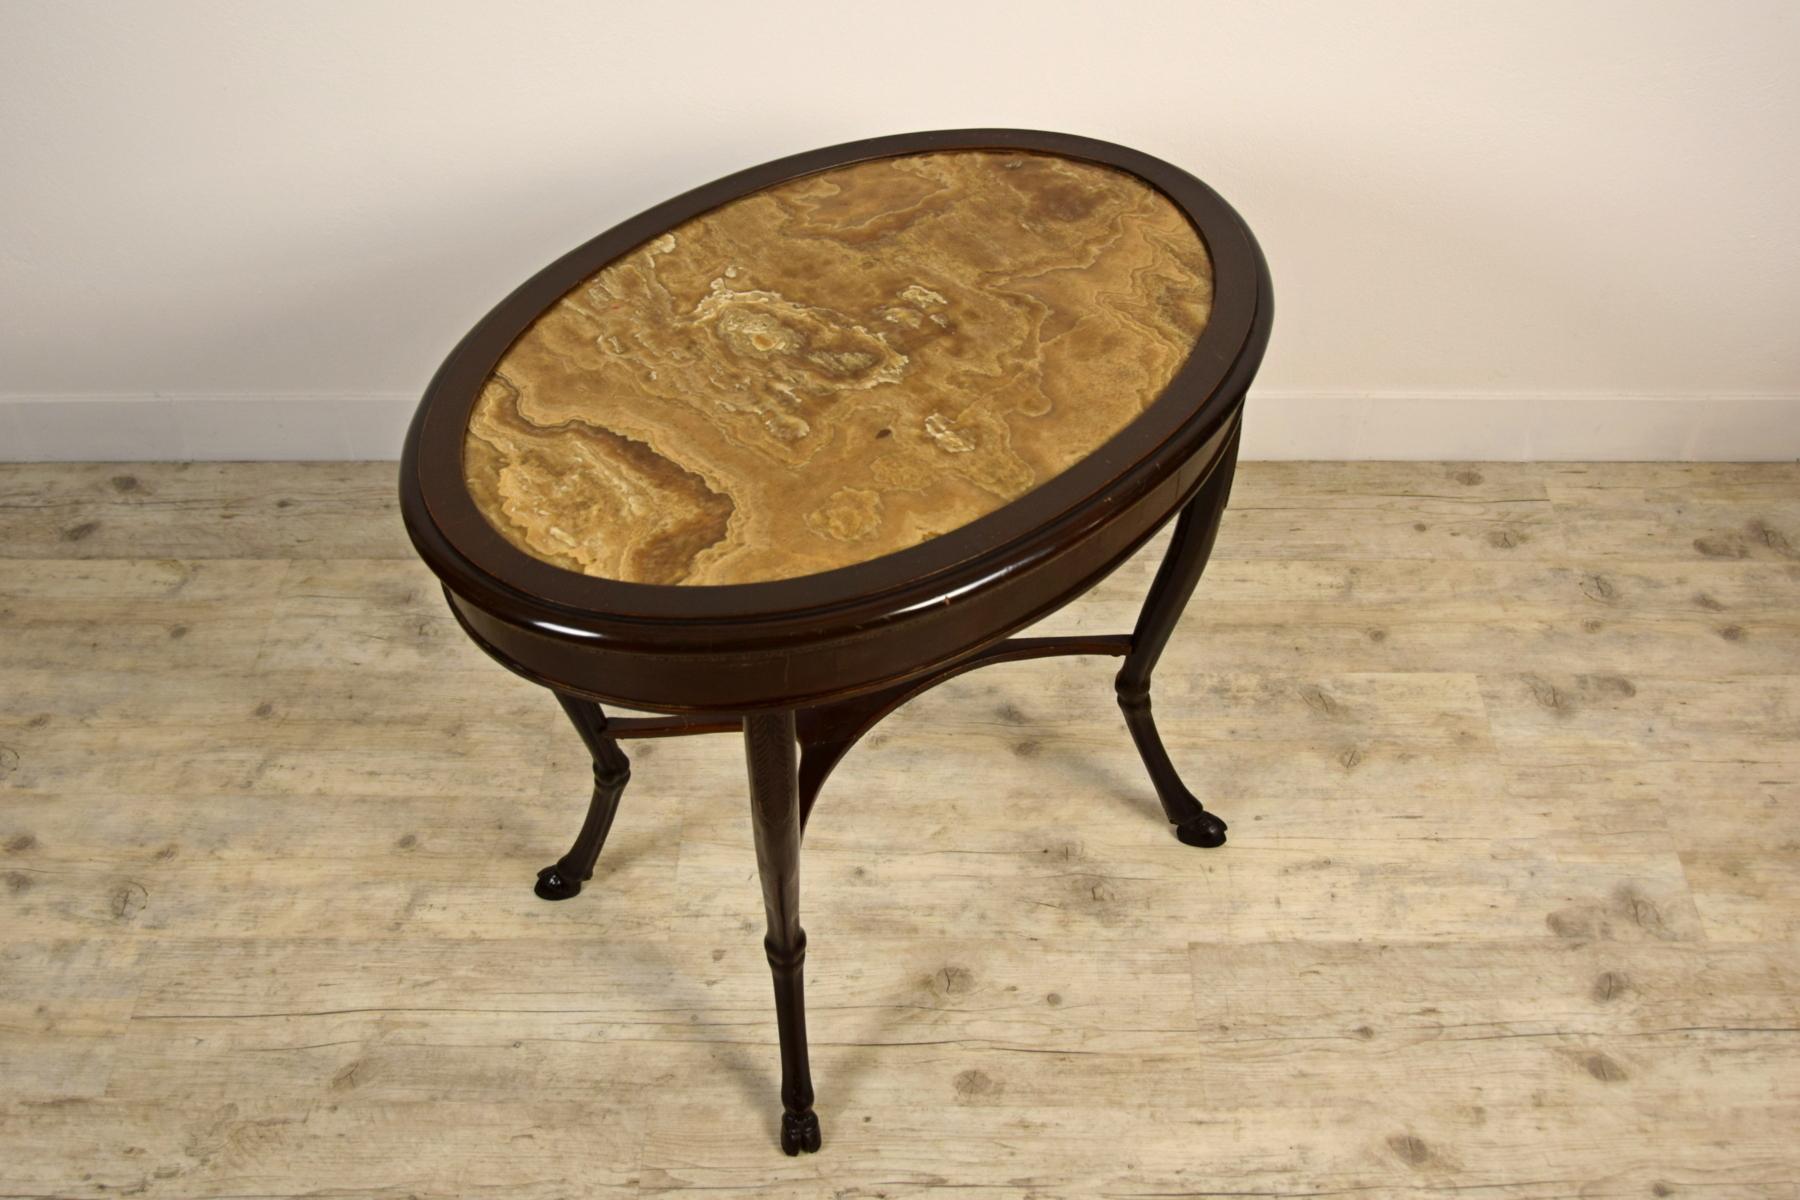 18th Century, Italian Neoclassical Wood Coffee Table with Alabaster Oval Top For Sale 9